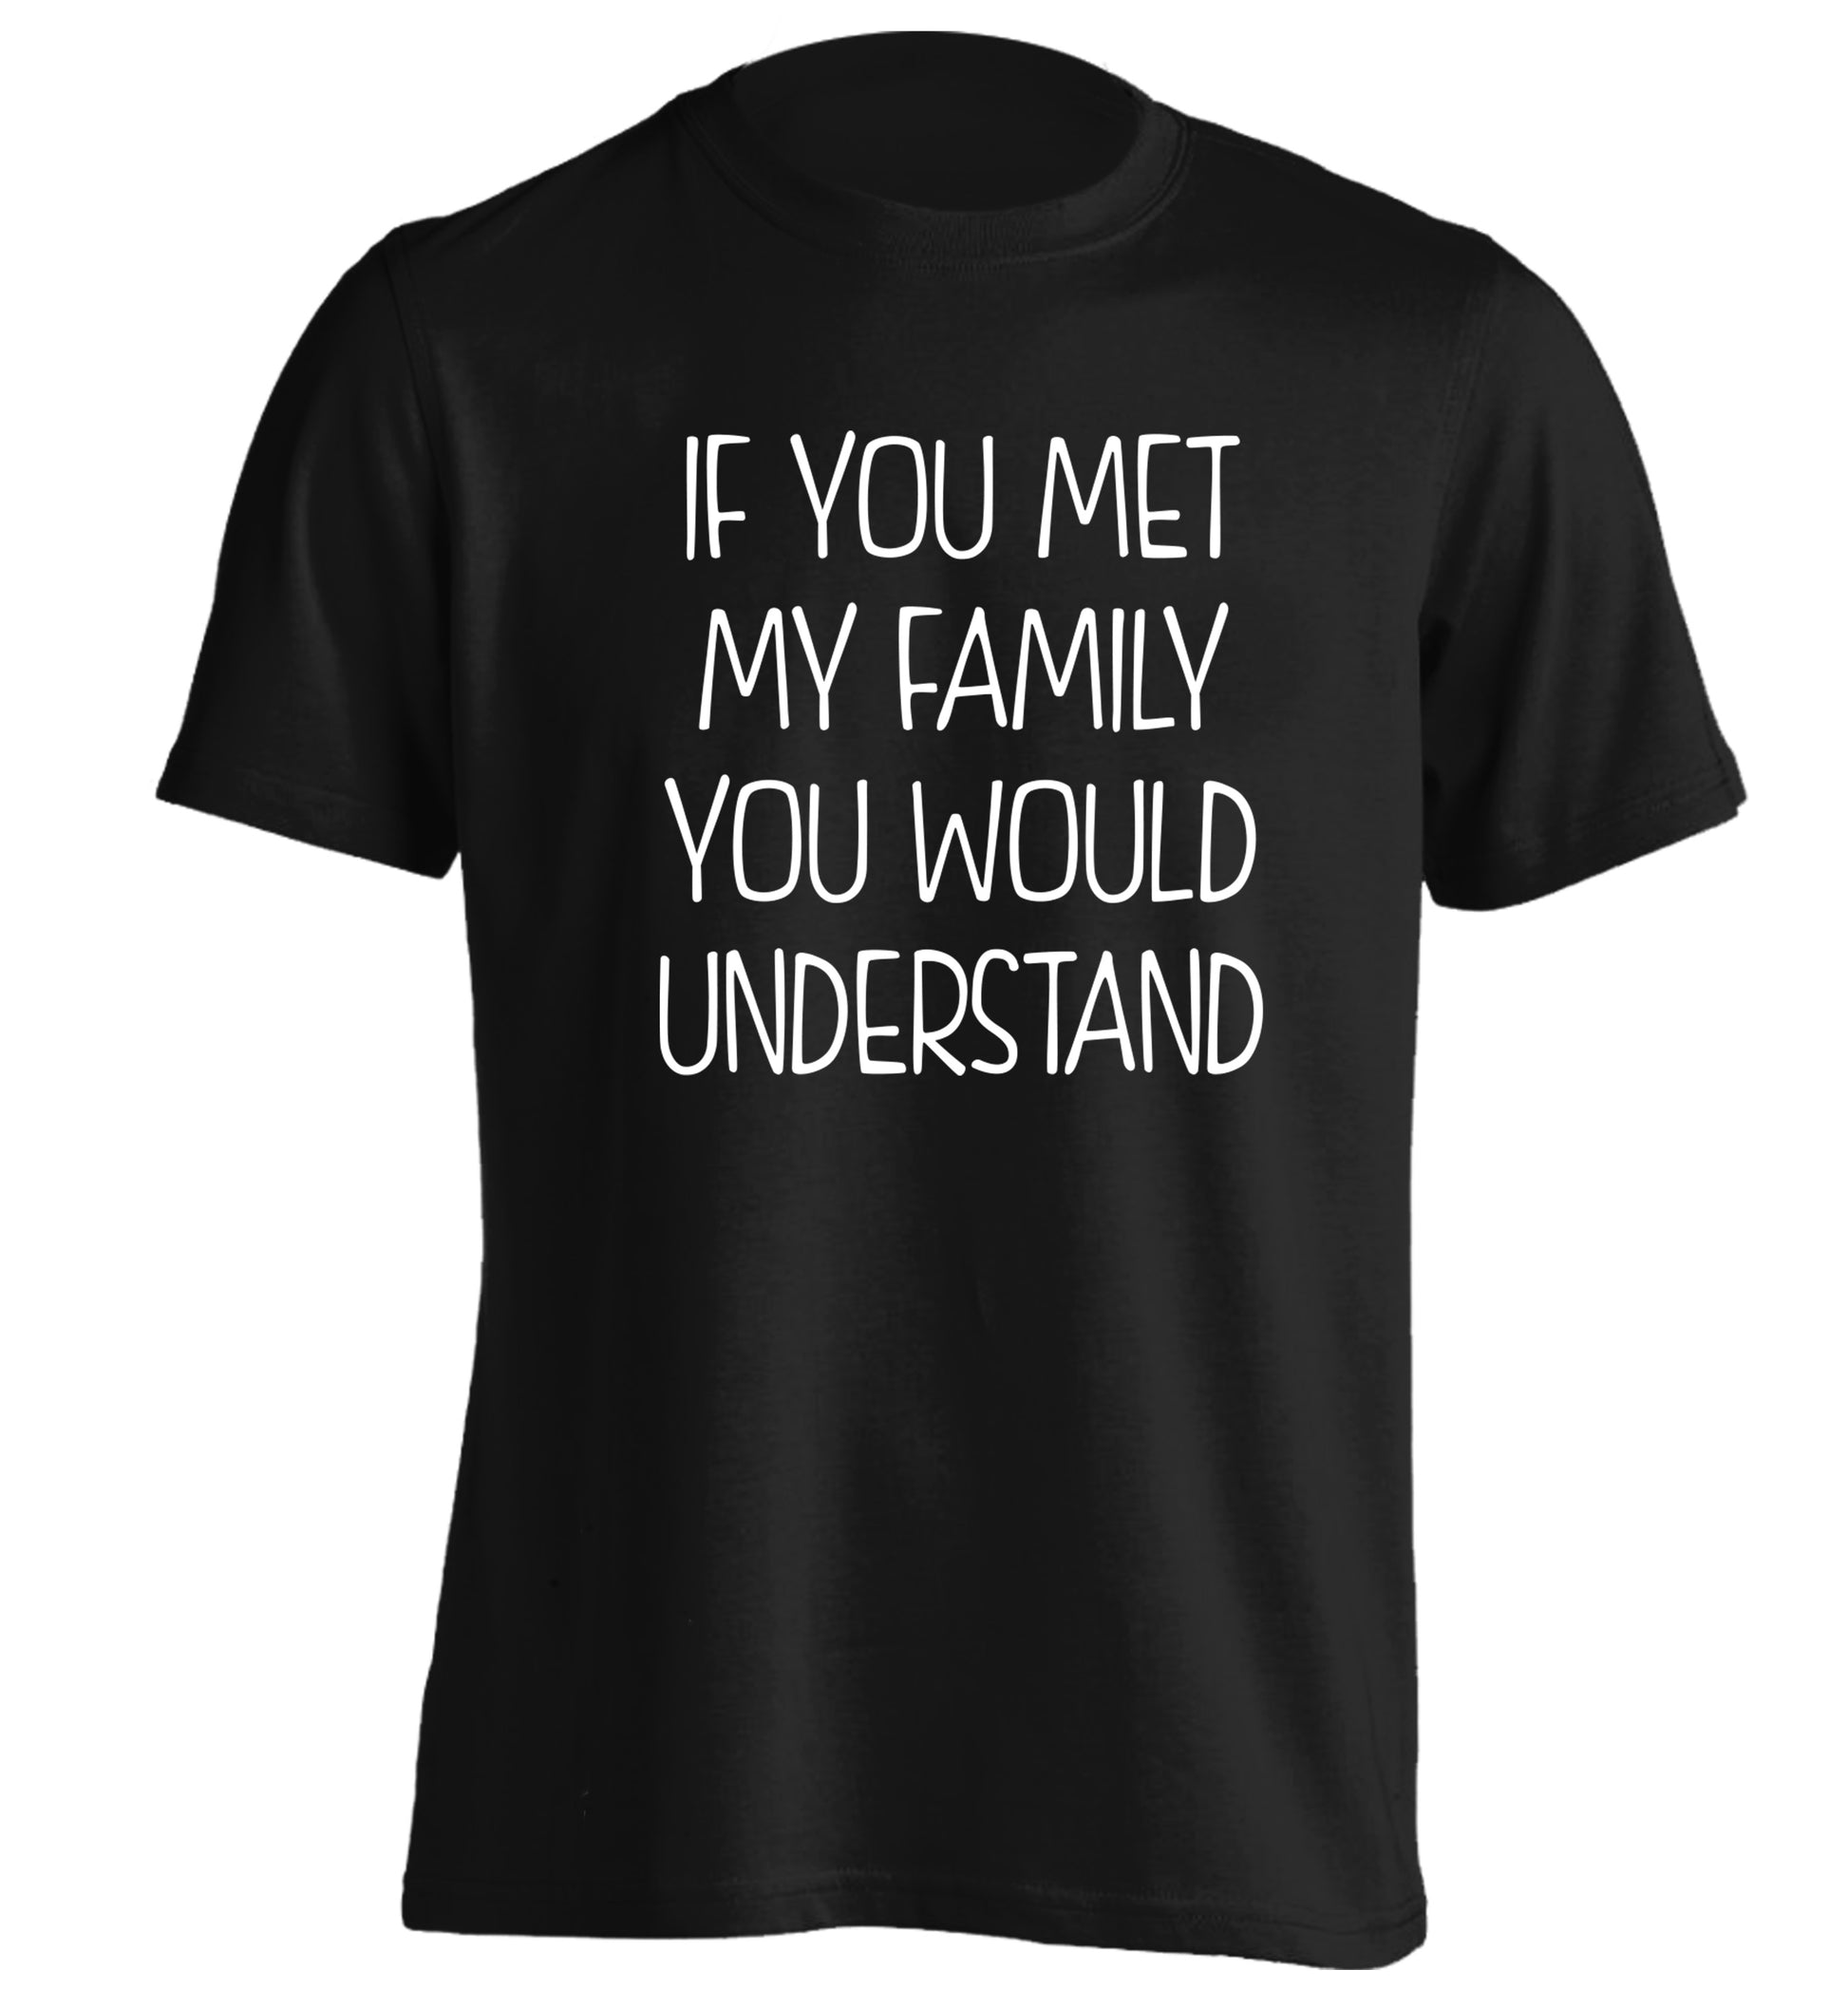 If you met my family you would understand adults unisex black Tshirt 2XL